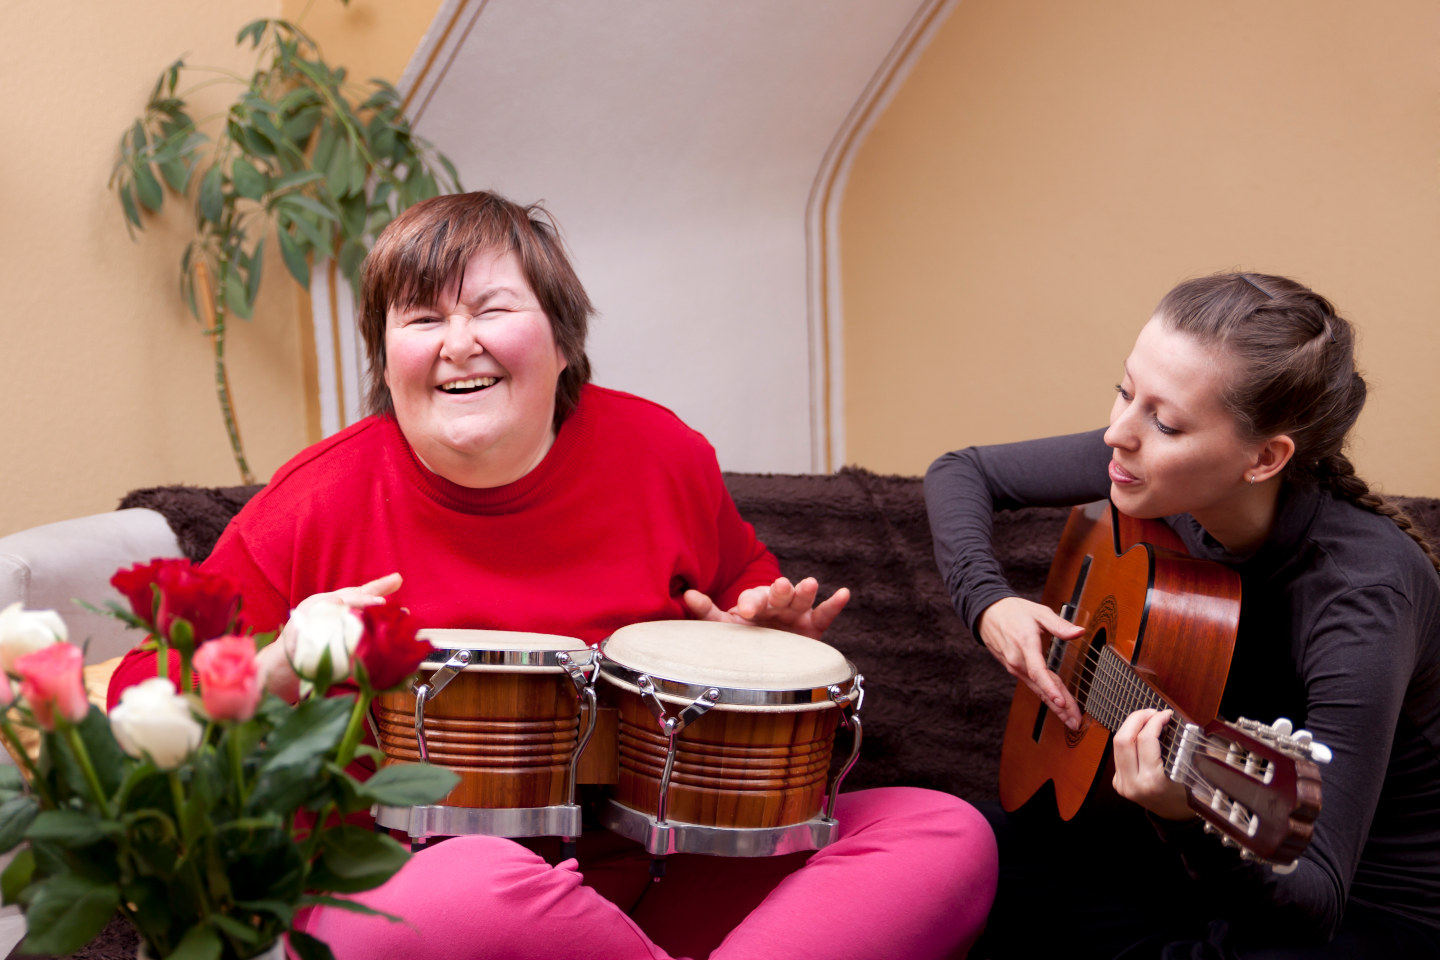 Two women make a music therapy and having fun